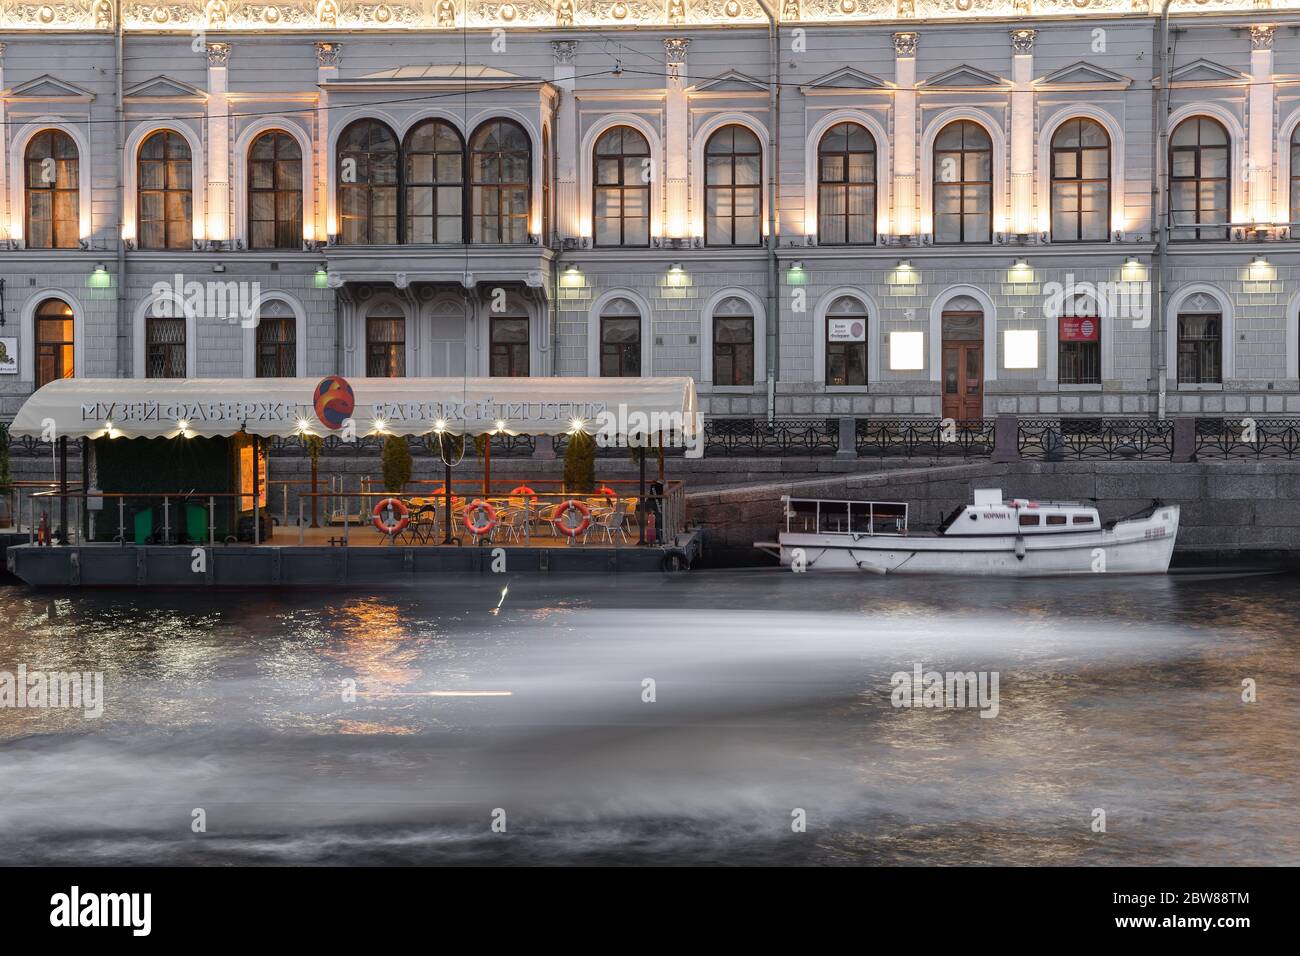 Saint Petersburg, Russia - May 30, 2019: View from the other side of the Fontanka River to the building that houses the Faberge Museum Stock Photo